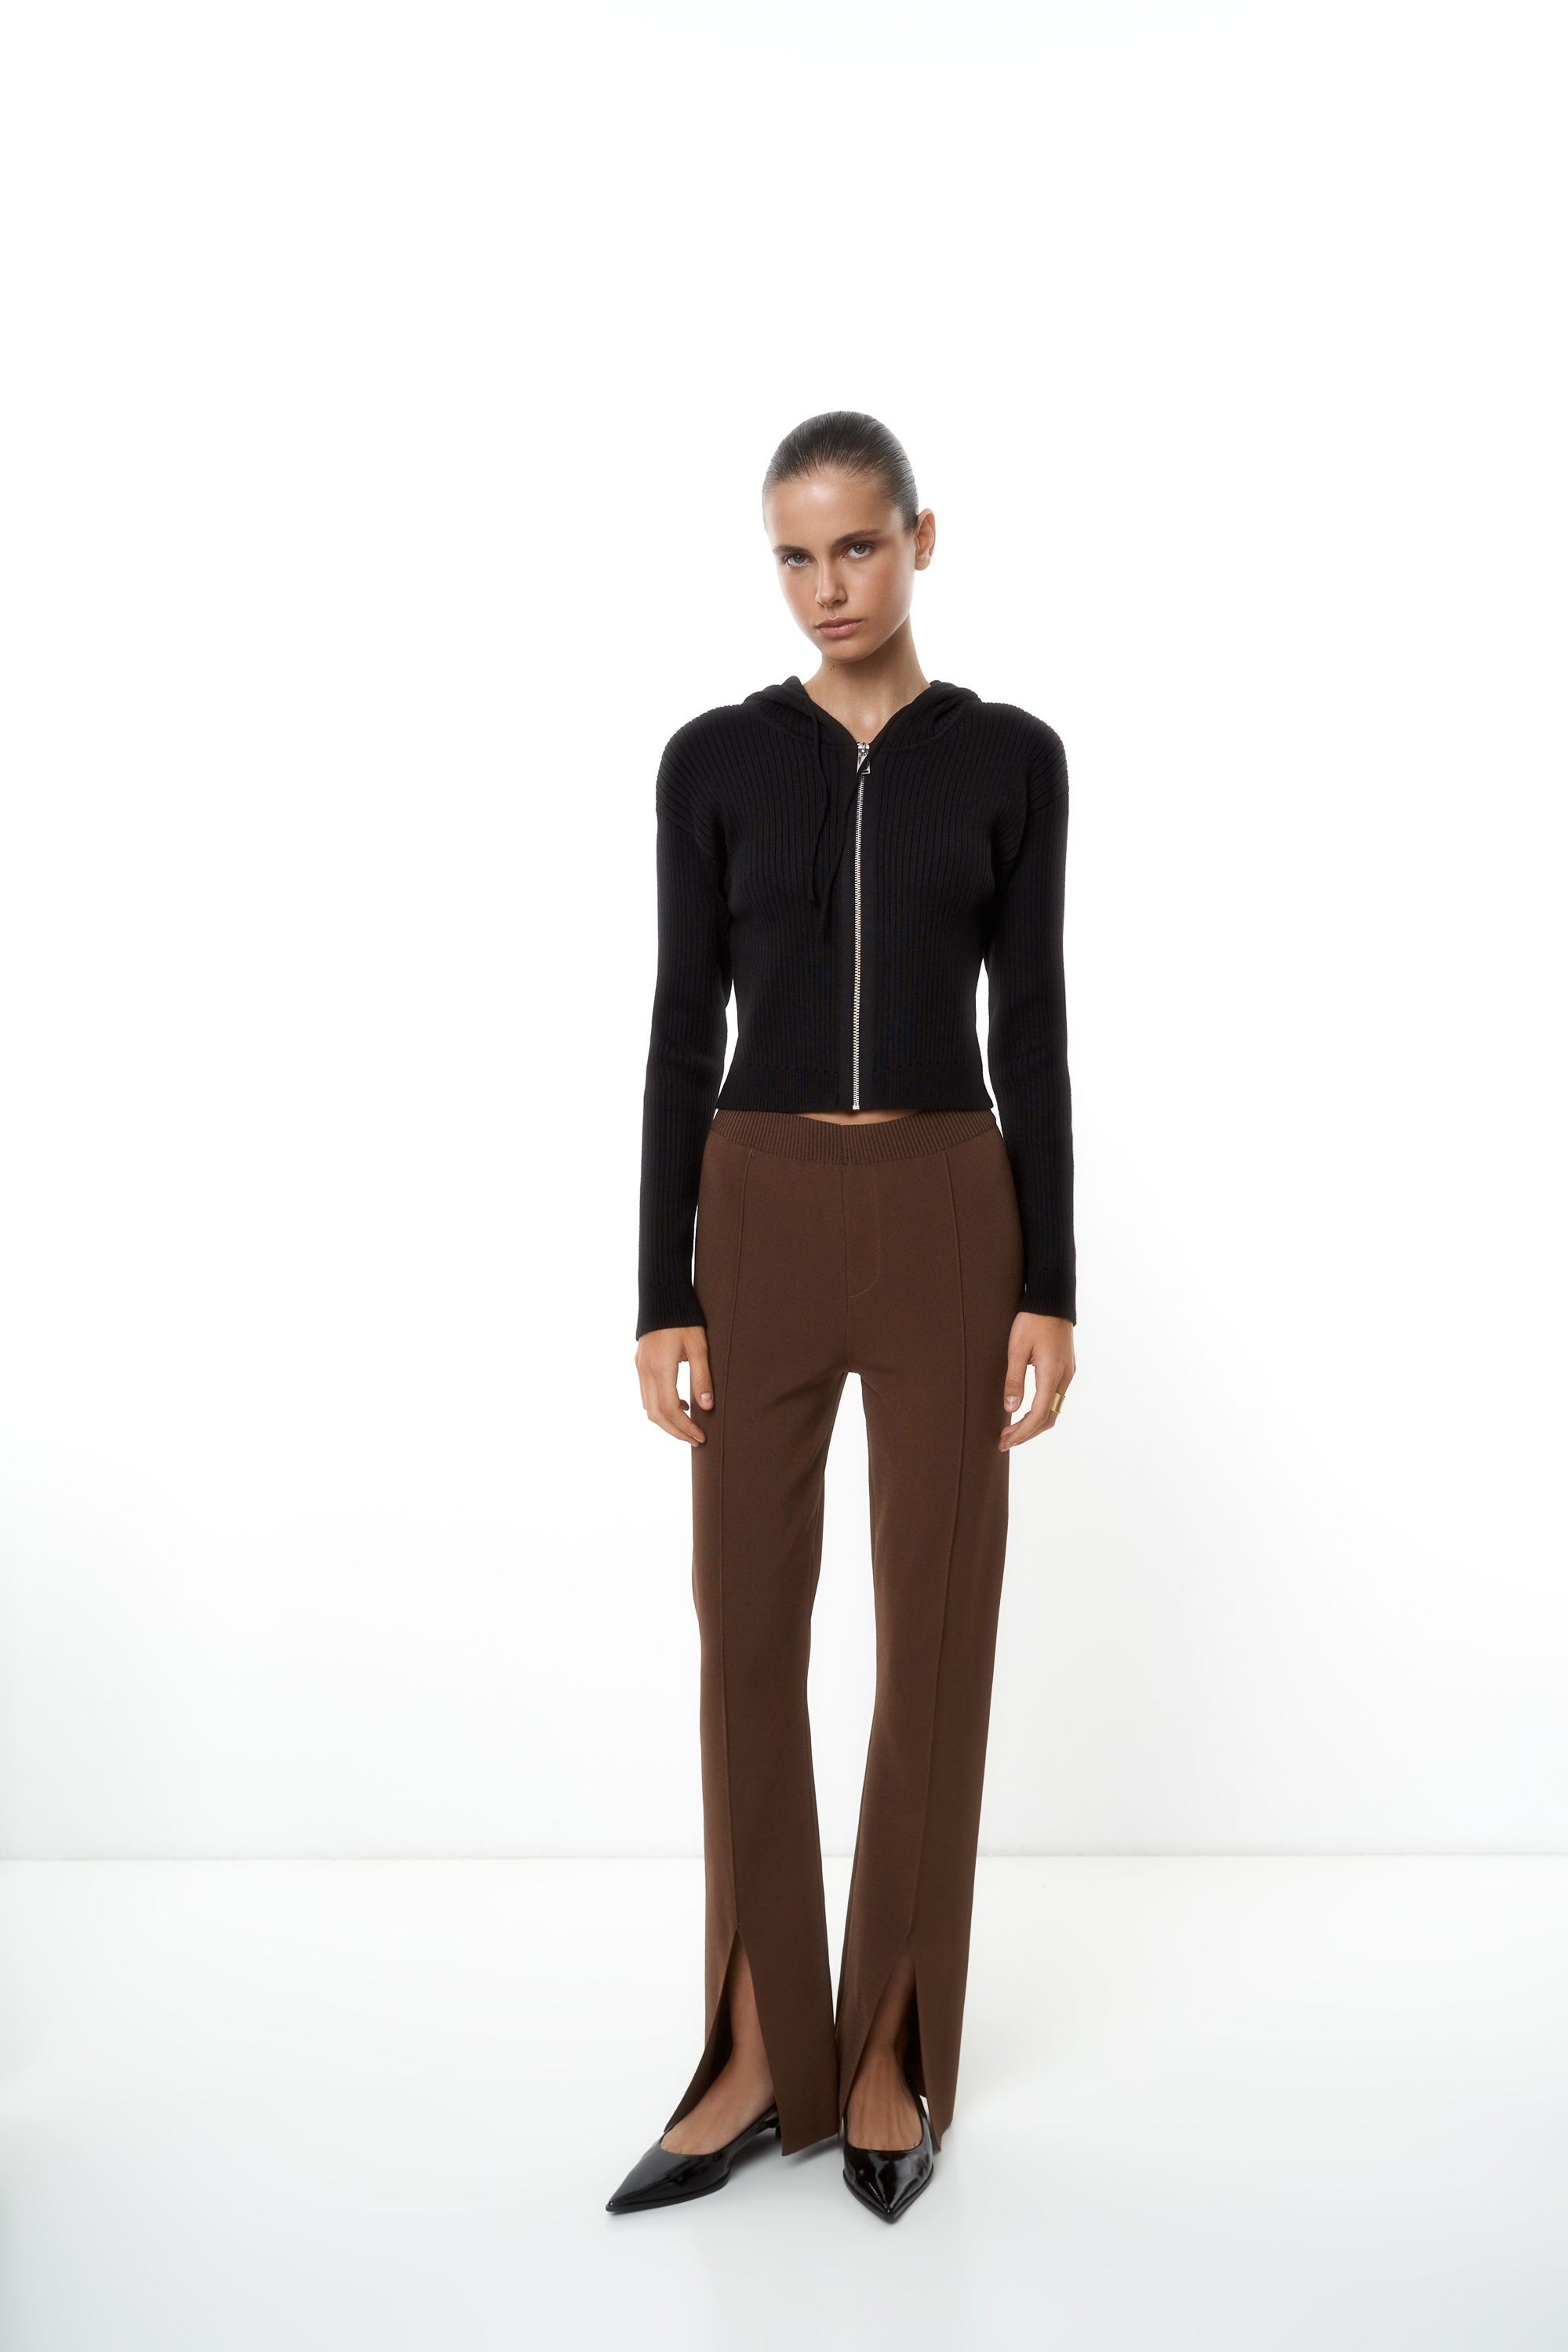 Trousers 3323-80 Chocolate from BRUSNiKA